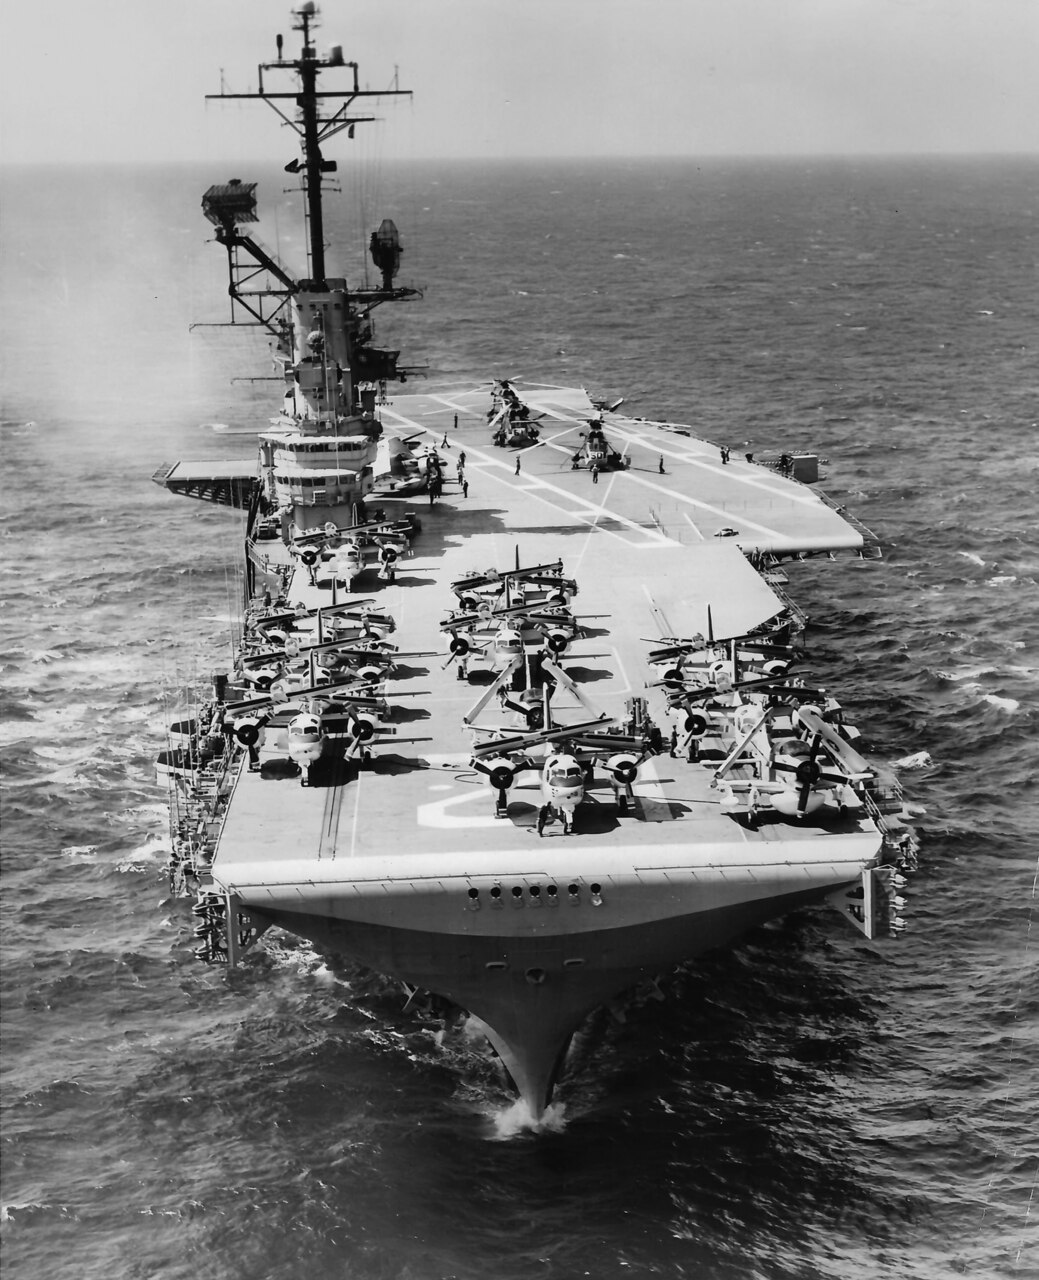 USS Hornet (CVS 12) also went through a series of redesignations (from originally CV 12 to CVA in October 1952, then to CVS in June 1958). Here, the carrier is shown in September 1962 as a CVS with S2F Trackers and SH-3 Sea King helicopters. Her angled flight deck is prominent.